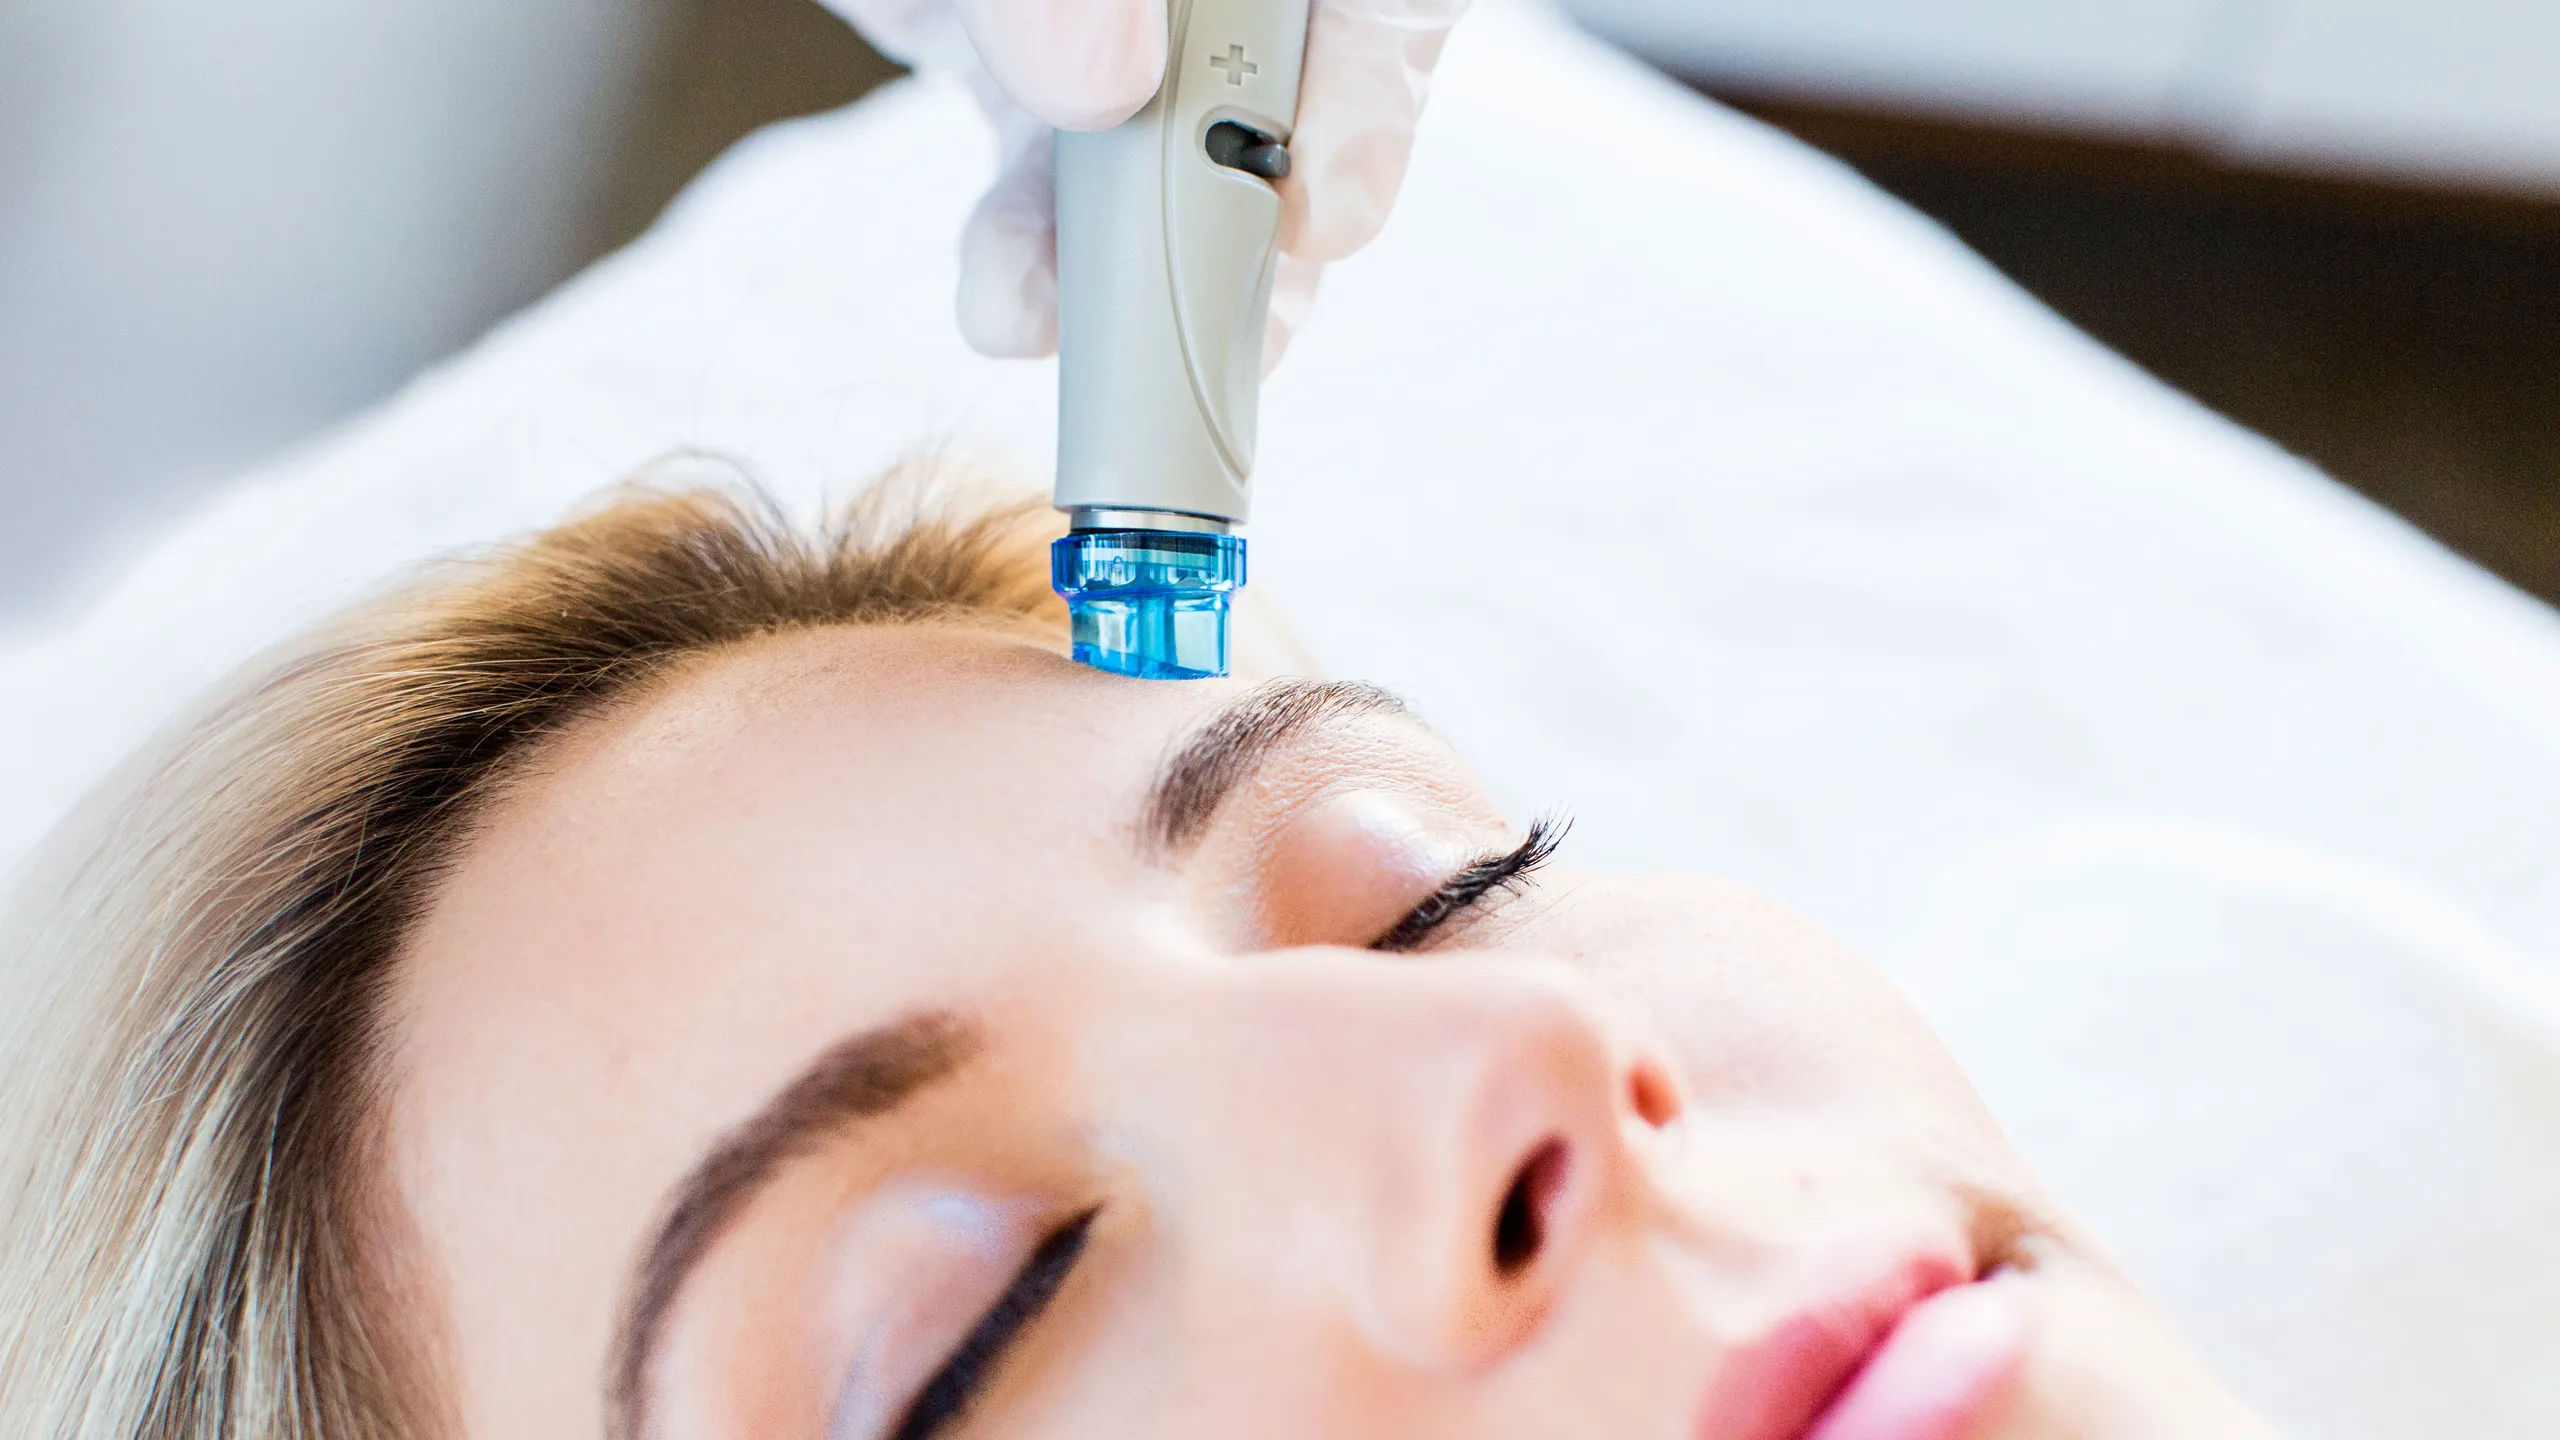 Hydrafacial in San Diego | Experience Premier Skin Rejuvenation at Prophecy Med Spa